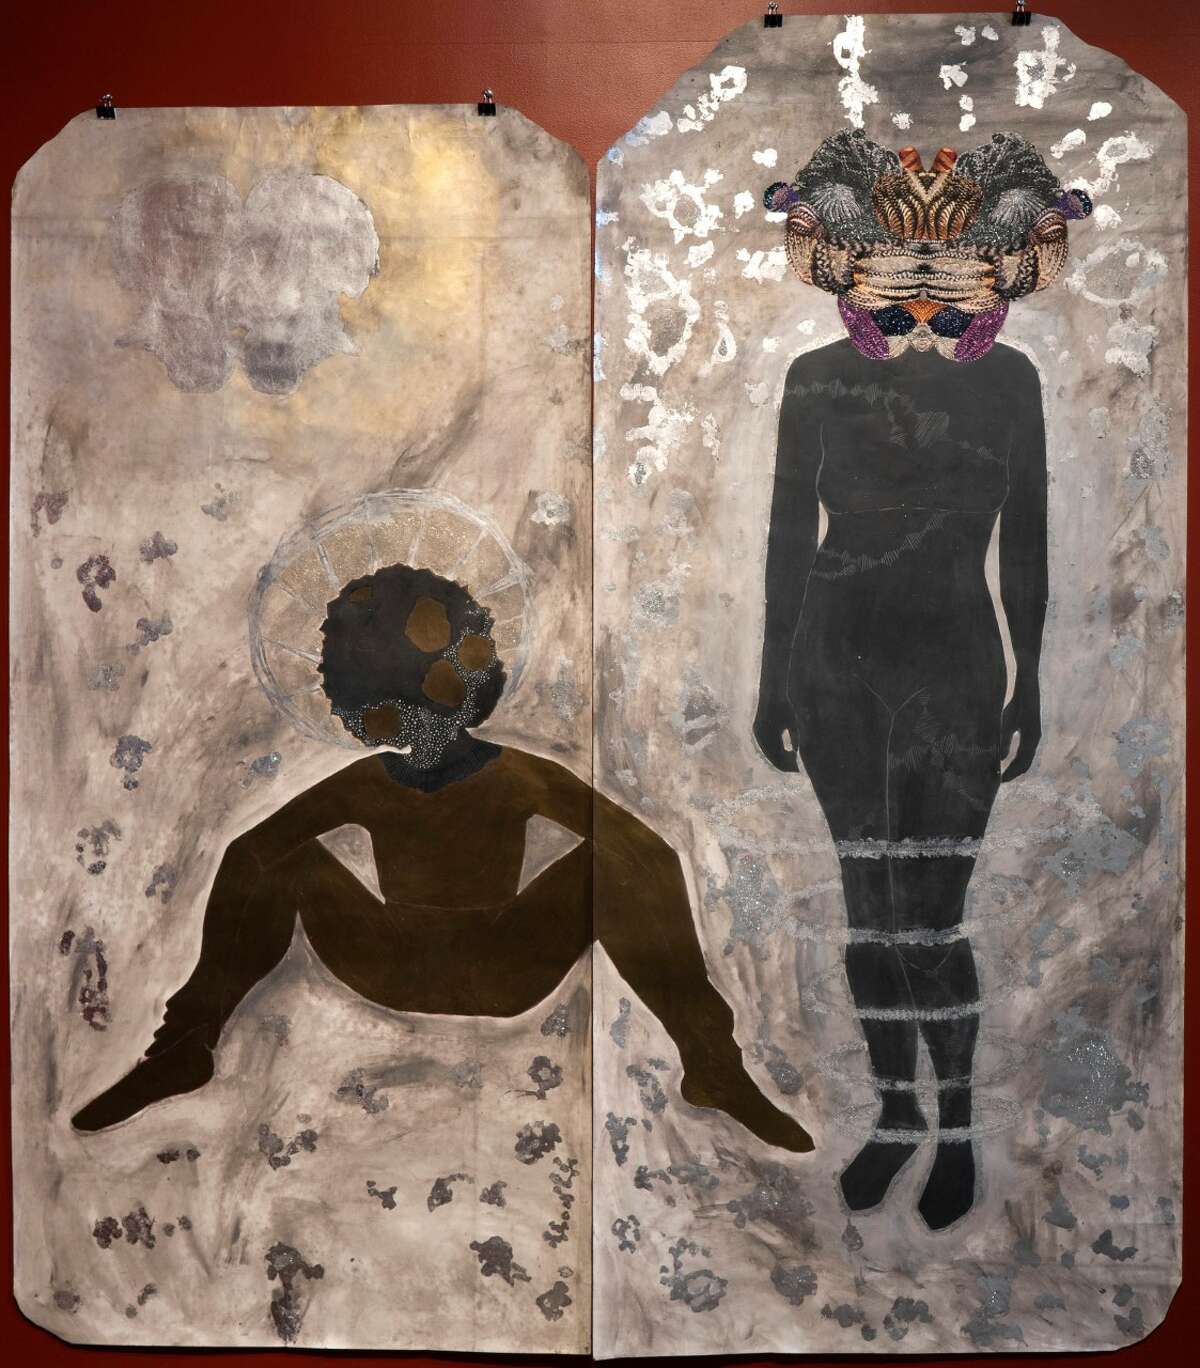 Alisa Sikelianos-Carter's "Afronauts and Ancestors," 2017. Acrylic, gouache, ink, micaceous oxide, silver foil glitter, white coarse mica, abalone shell, and collage on paper. (Photo William Jaeger)